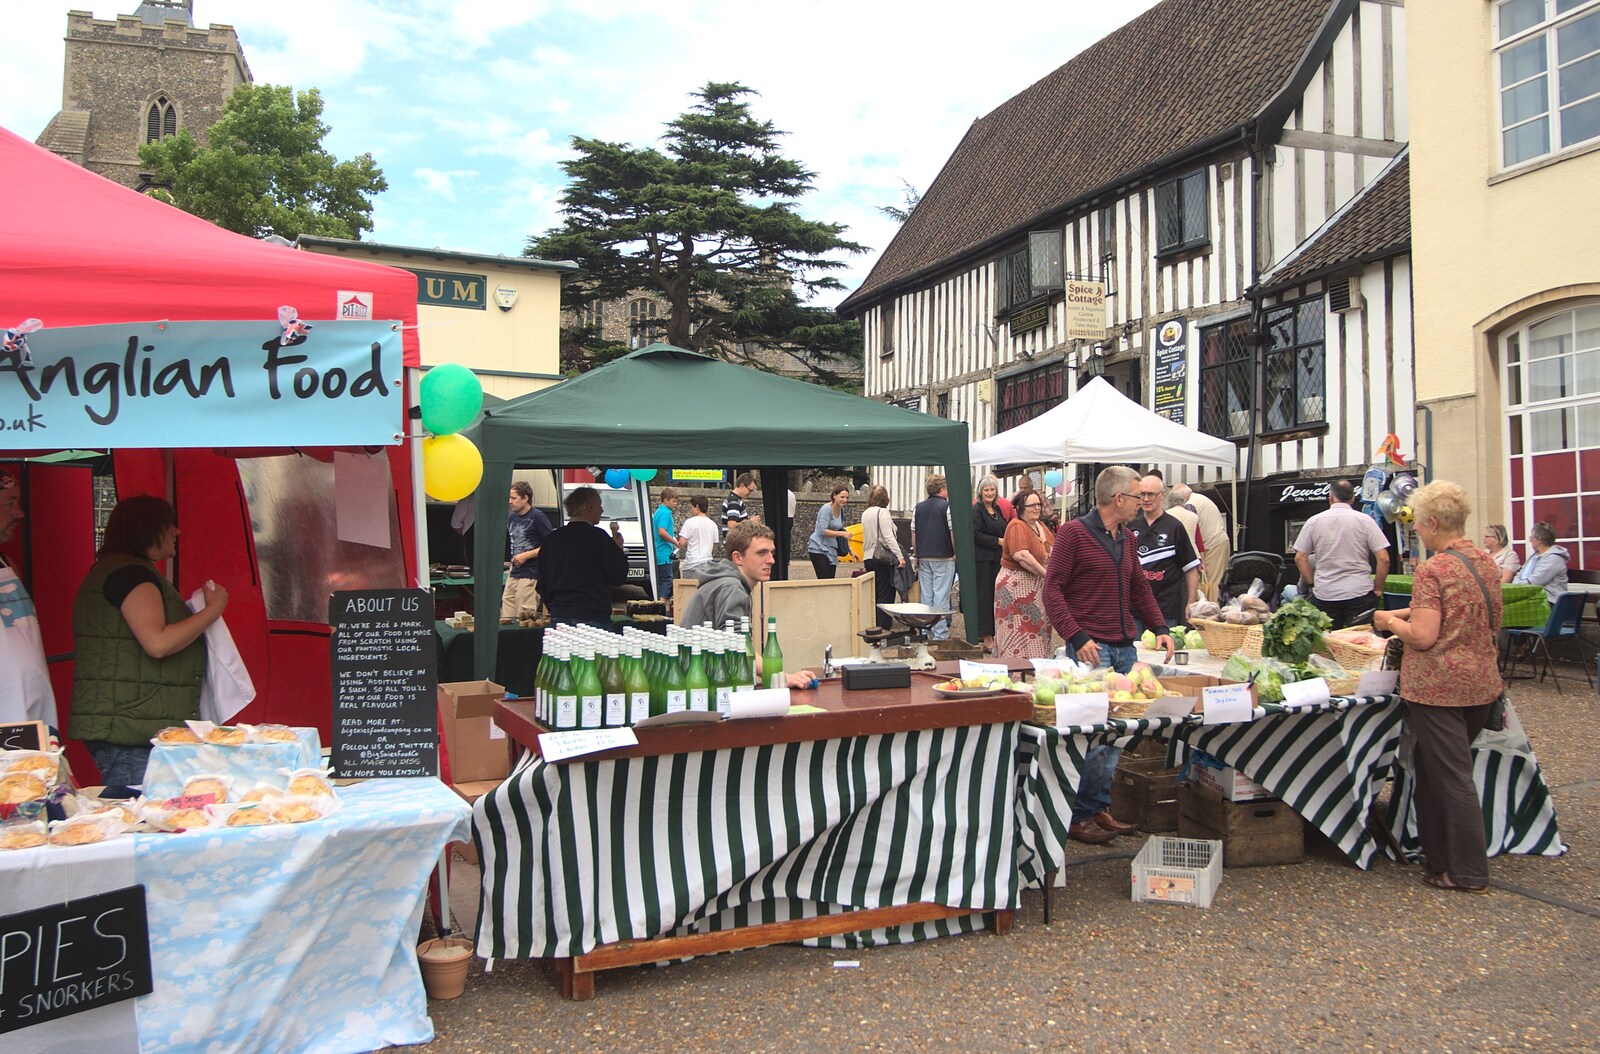 The market place, and Trevor's apple juice from Farmers' Market and Harvest Day, Diss and Brome, Norfolk and Suffolk - 10th September 2011